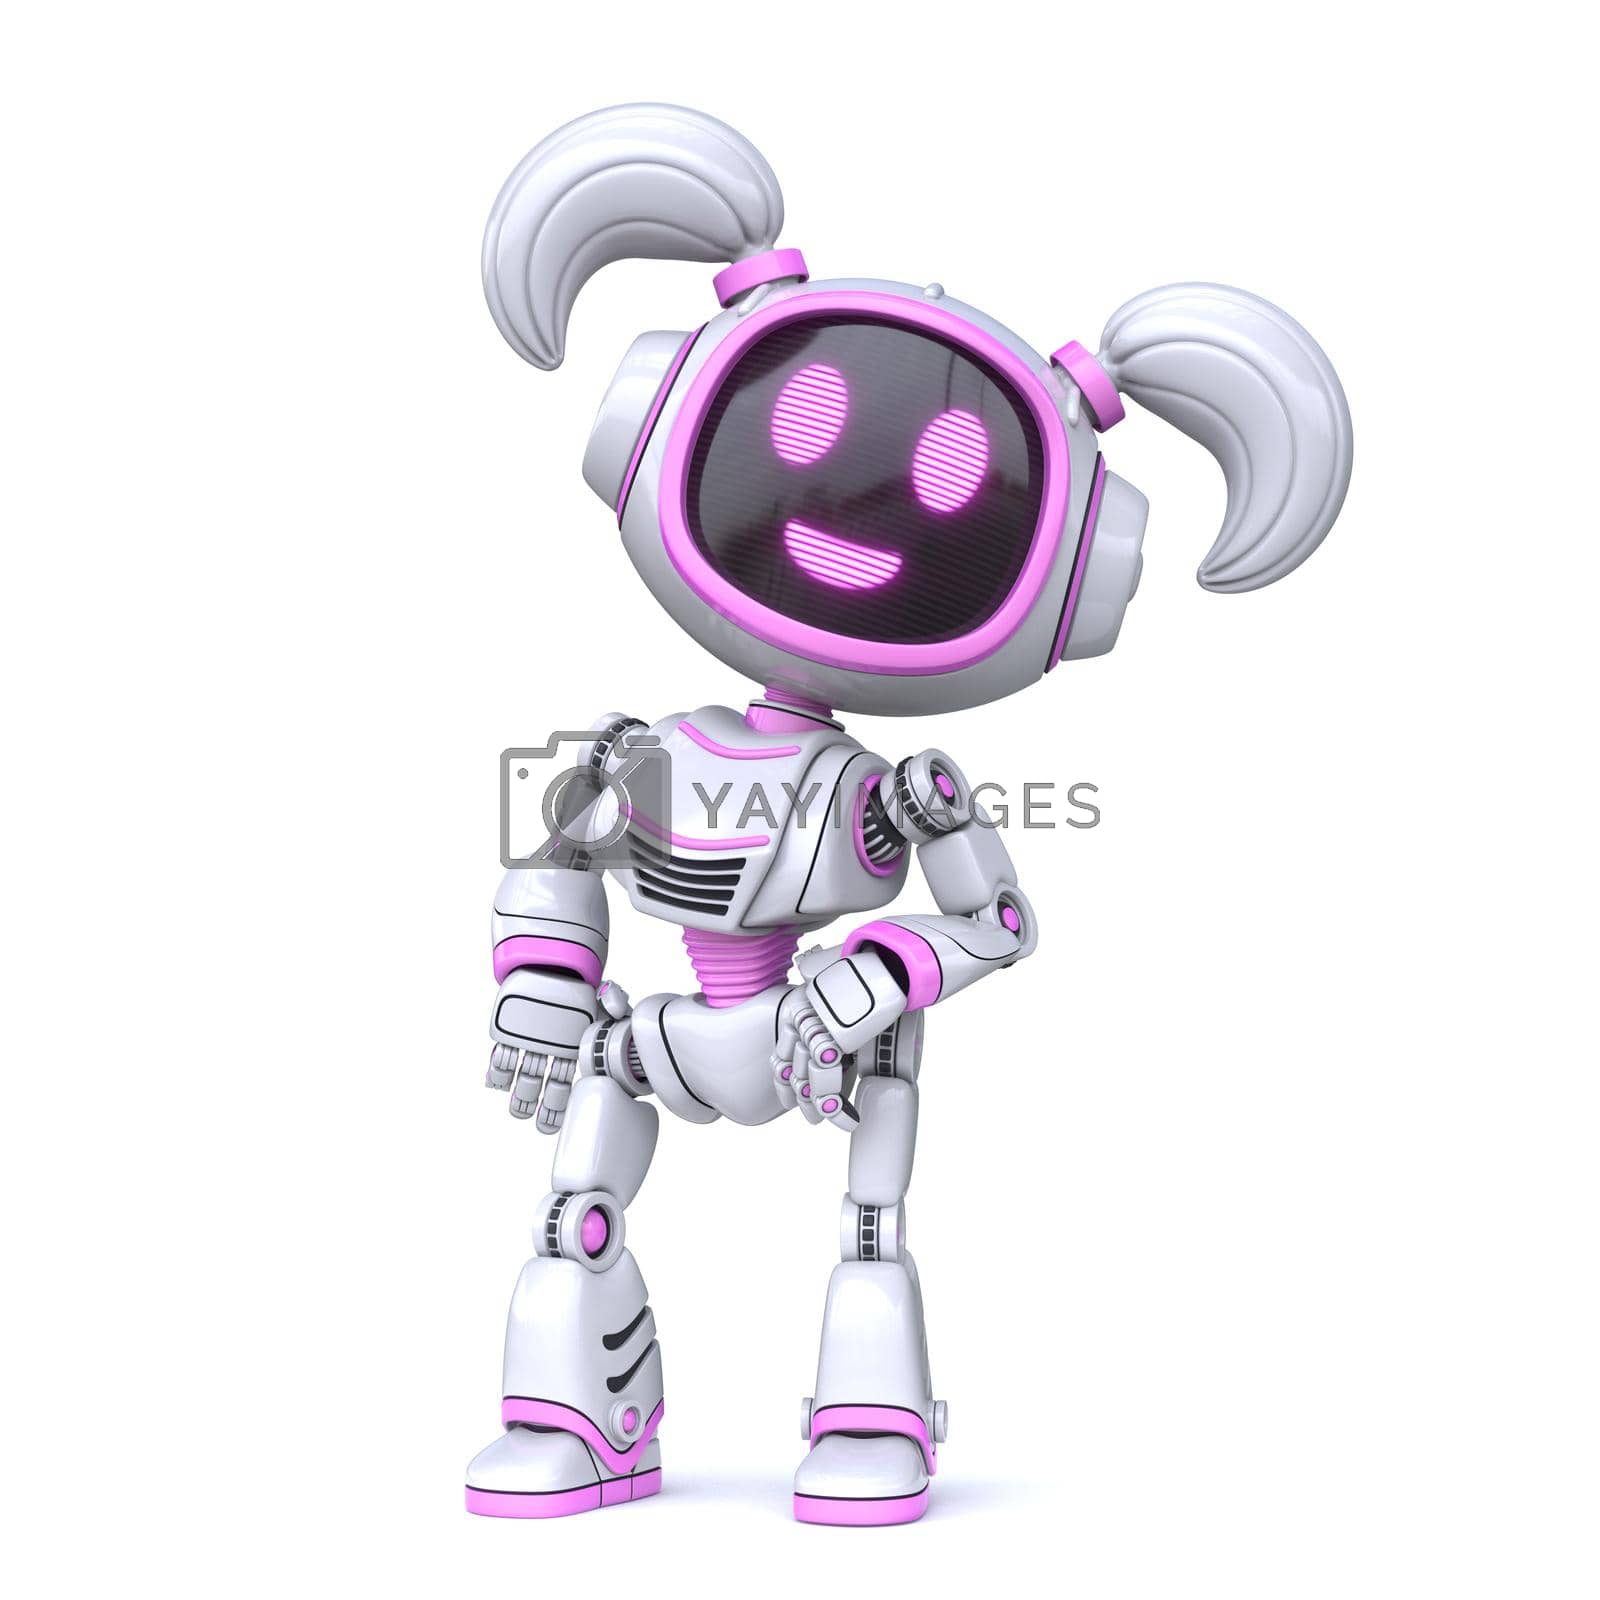 Cute pink girl robot pose as a photo model 3D rendering illustration isolated on white background